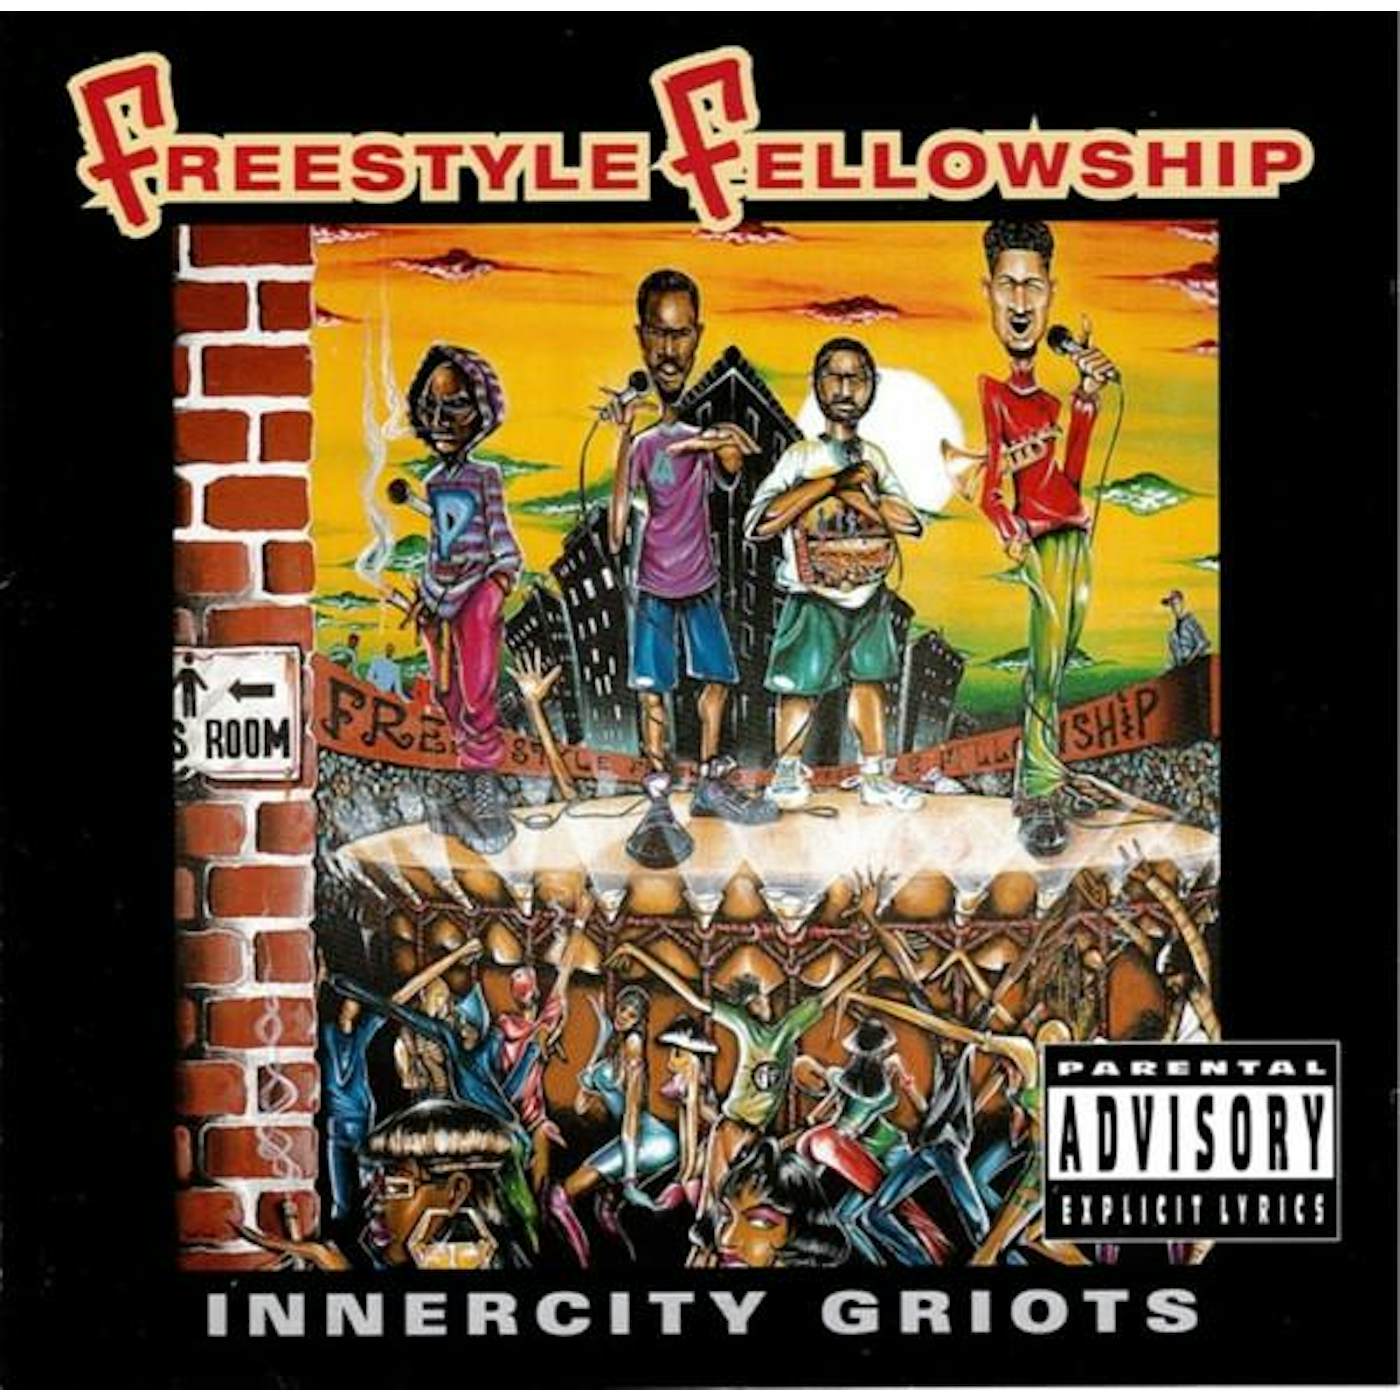 Freestyle Fellowship Innercity Griots (180g) Vinyl Record